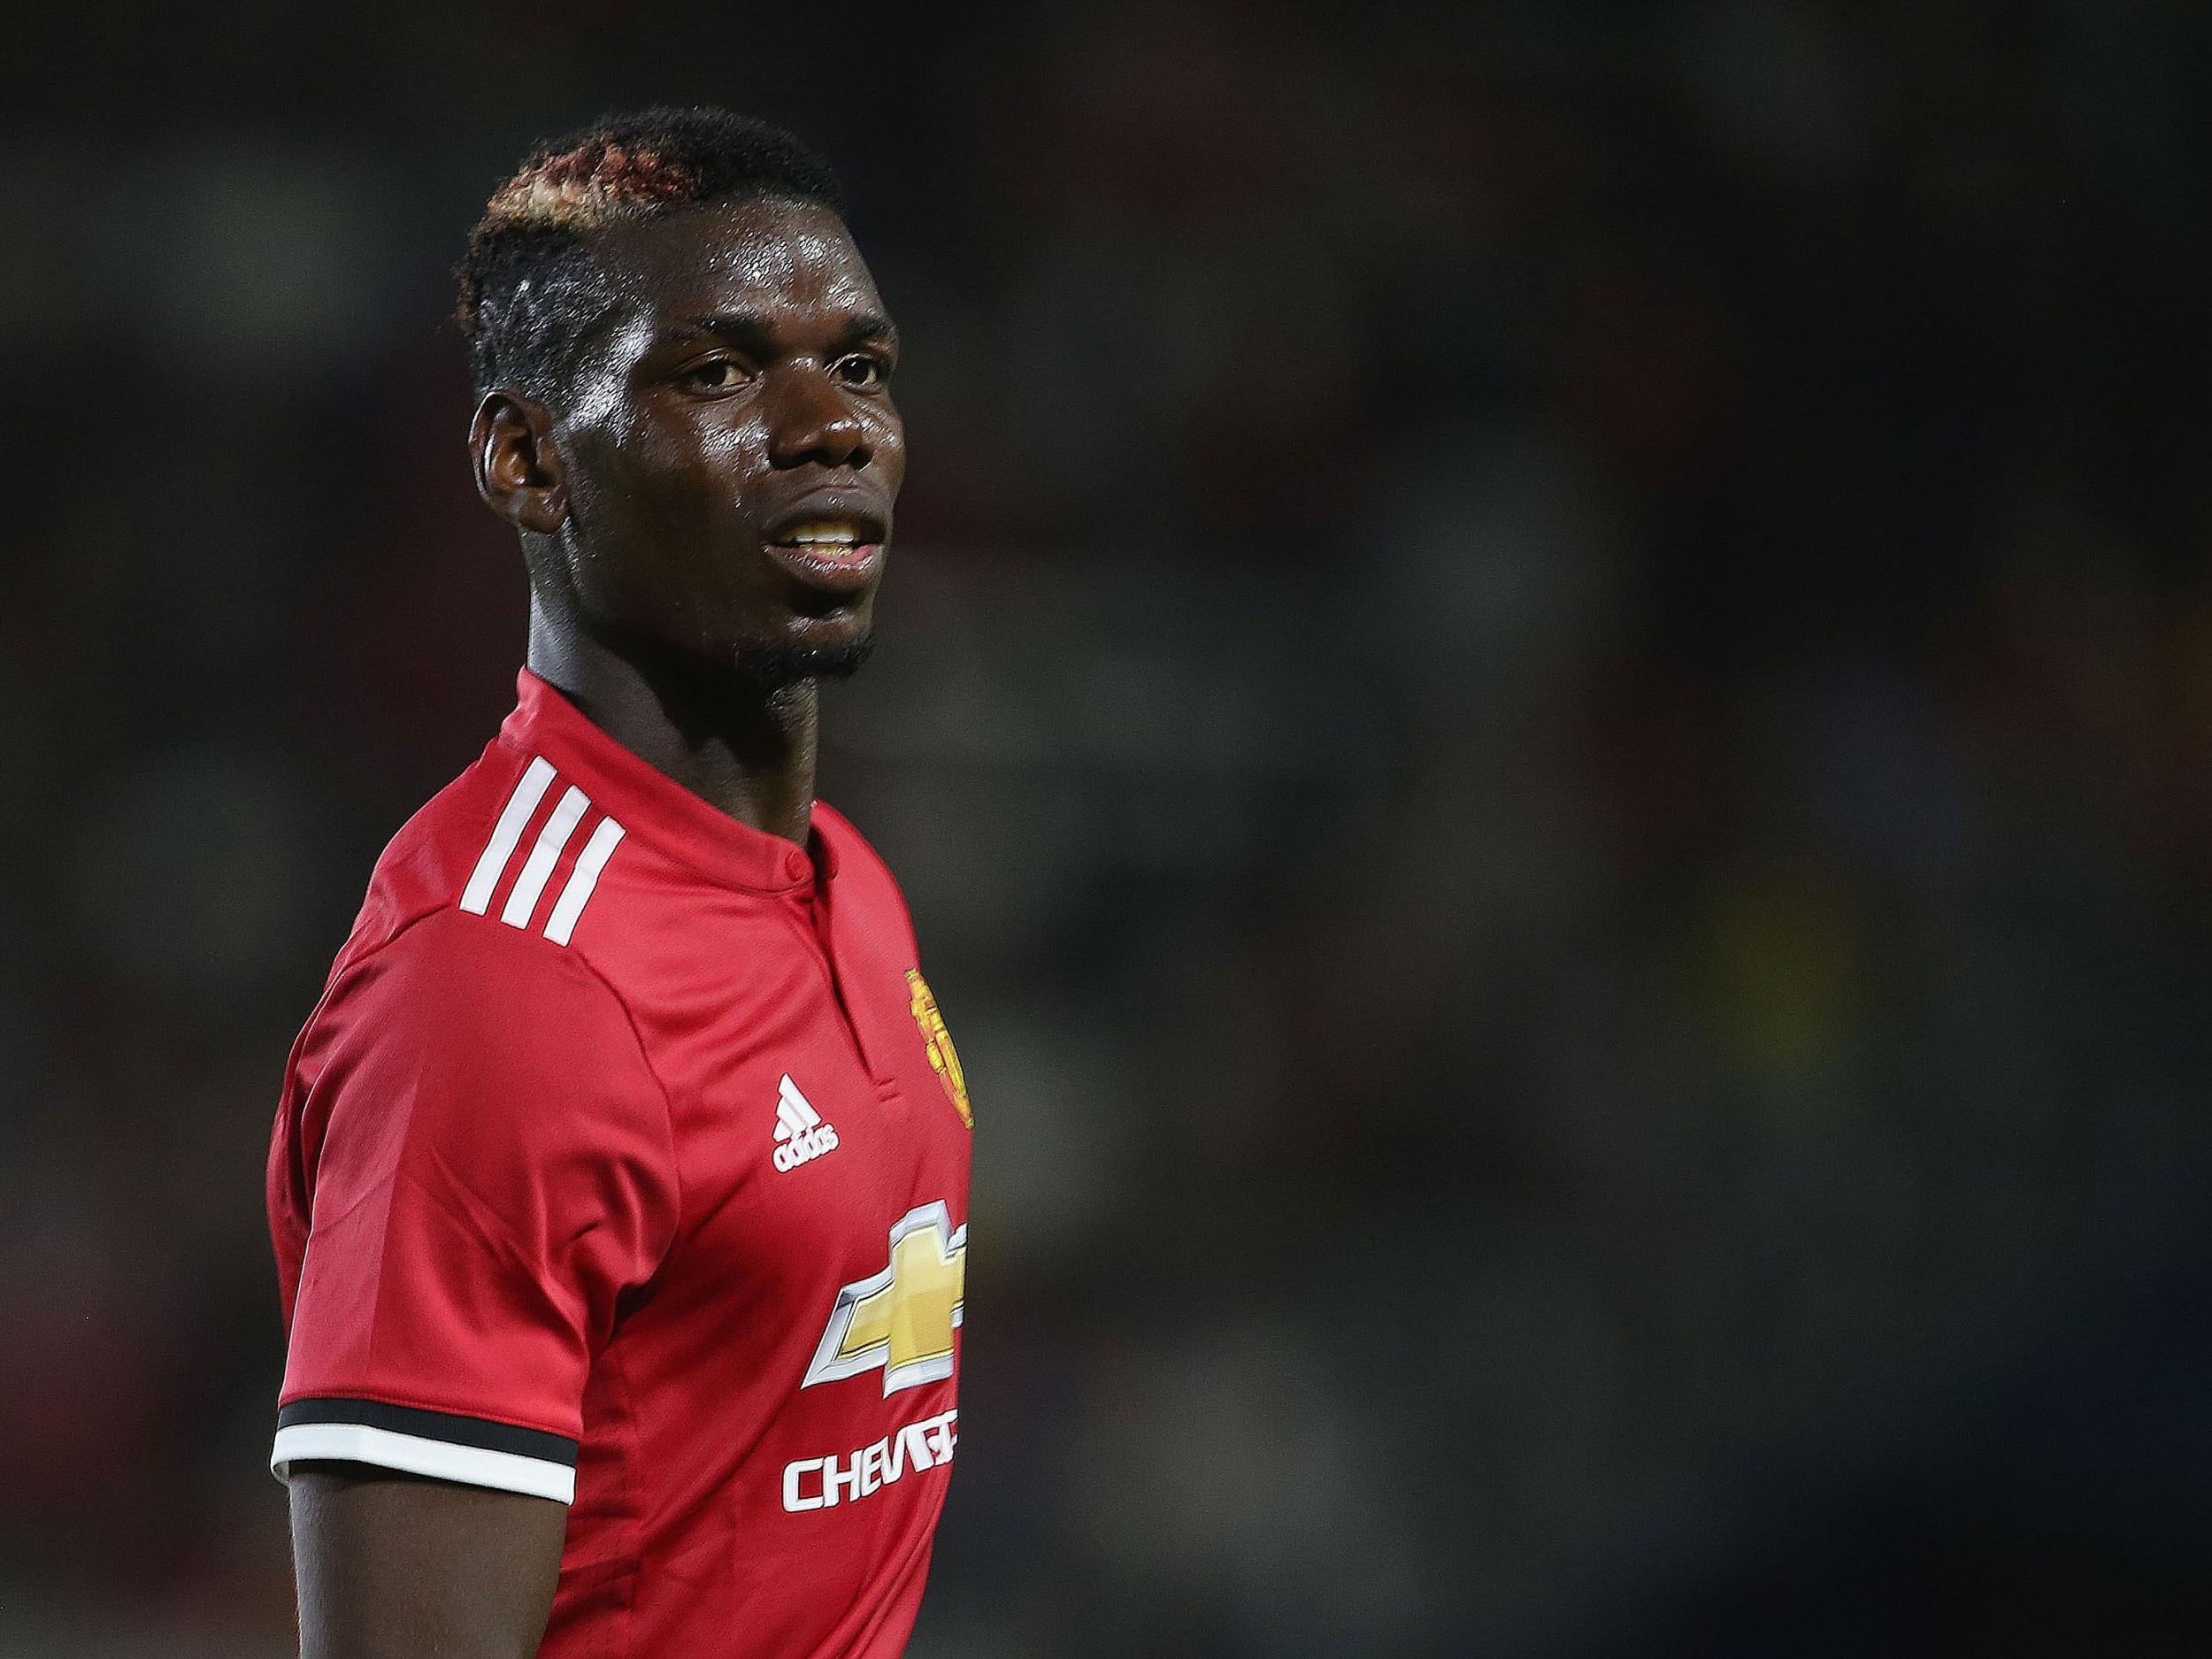 Pogba should be freed up to play in a more attacking role this season